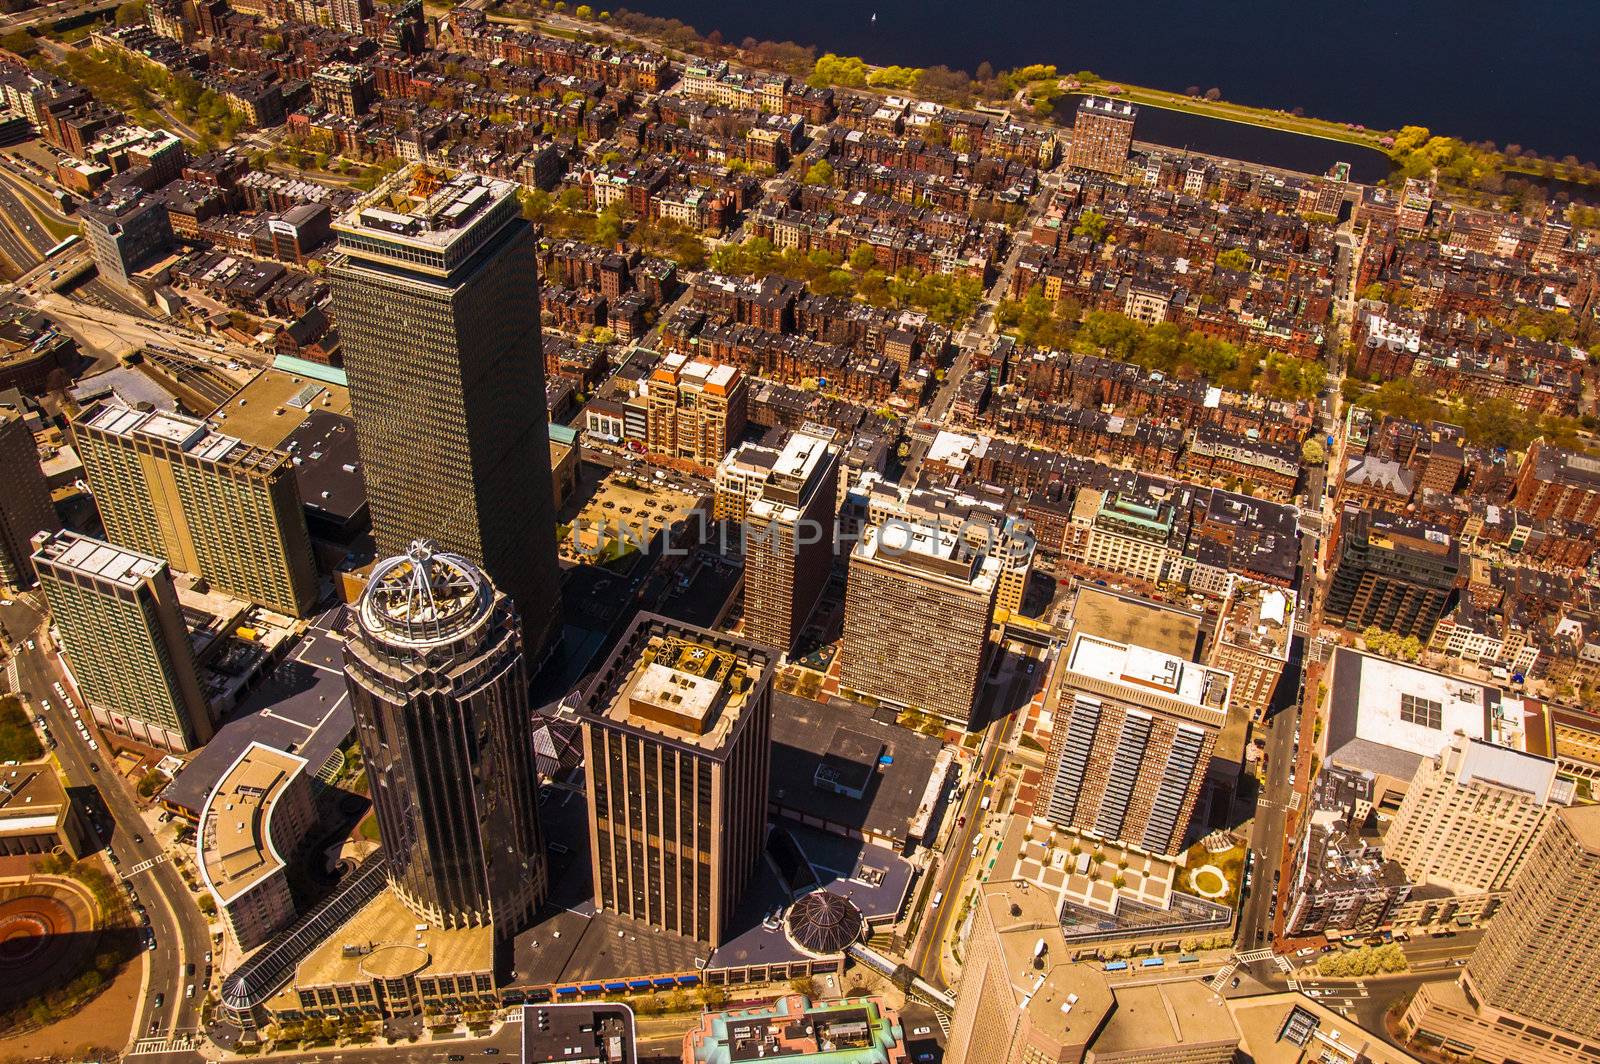 Boston's Back Bay area and downtown from the air